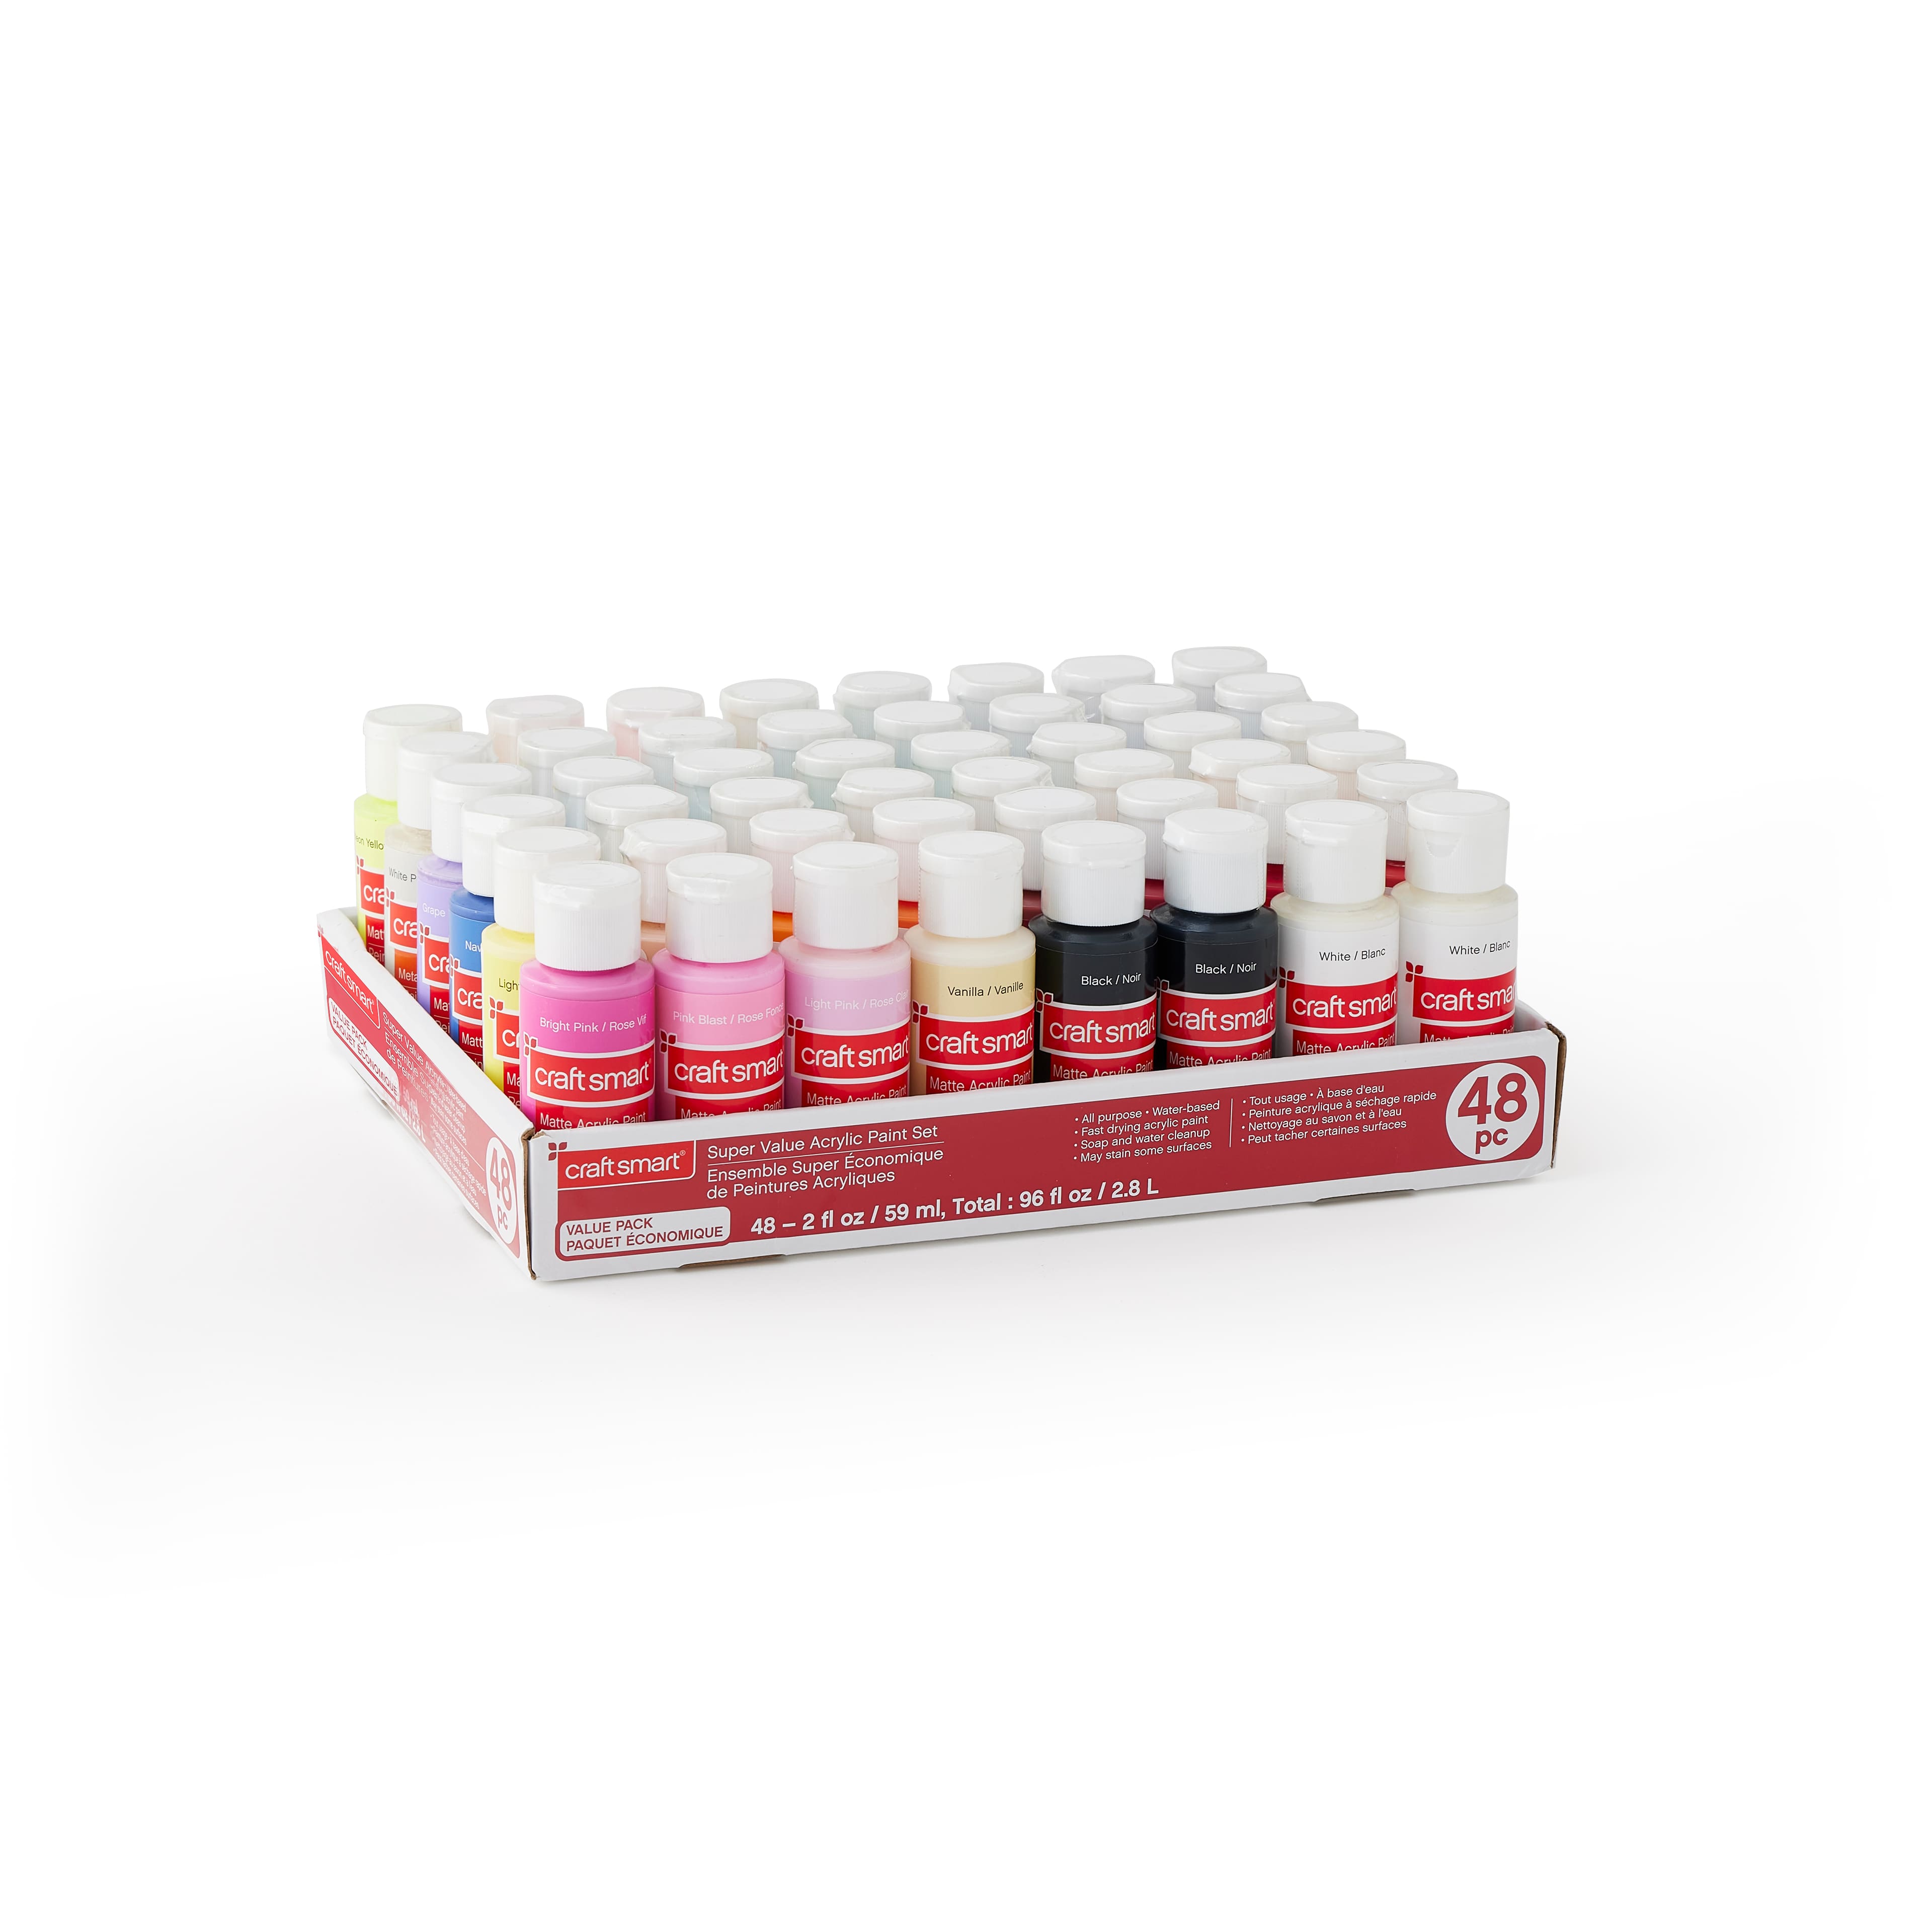 12 Packs: 4 ct. (48 total) Pastel Acrylic Paint Value Set by Craft Smart® 